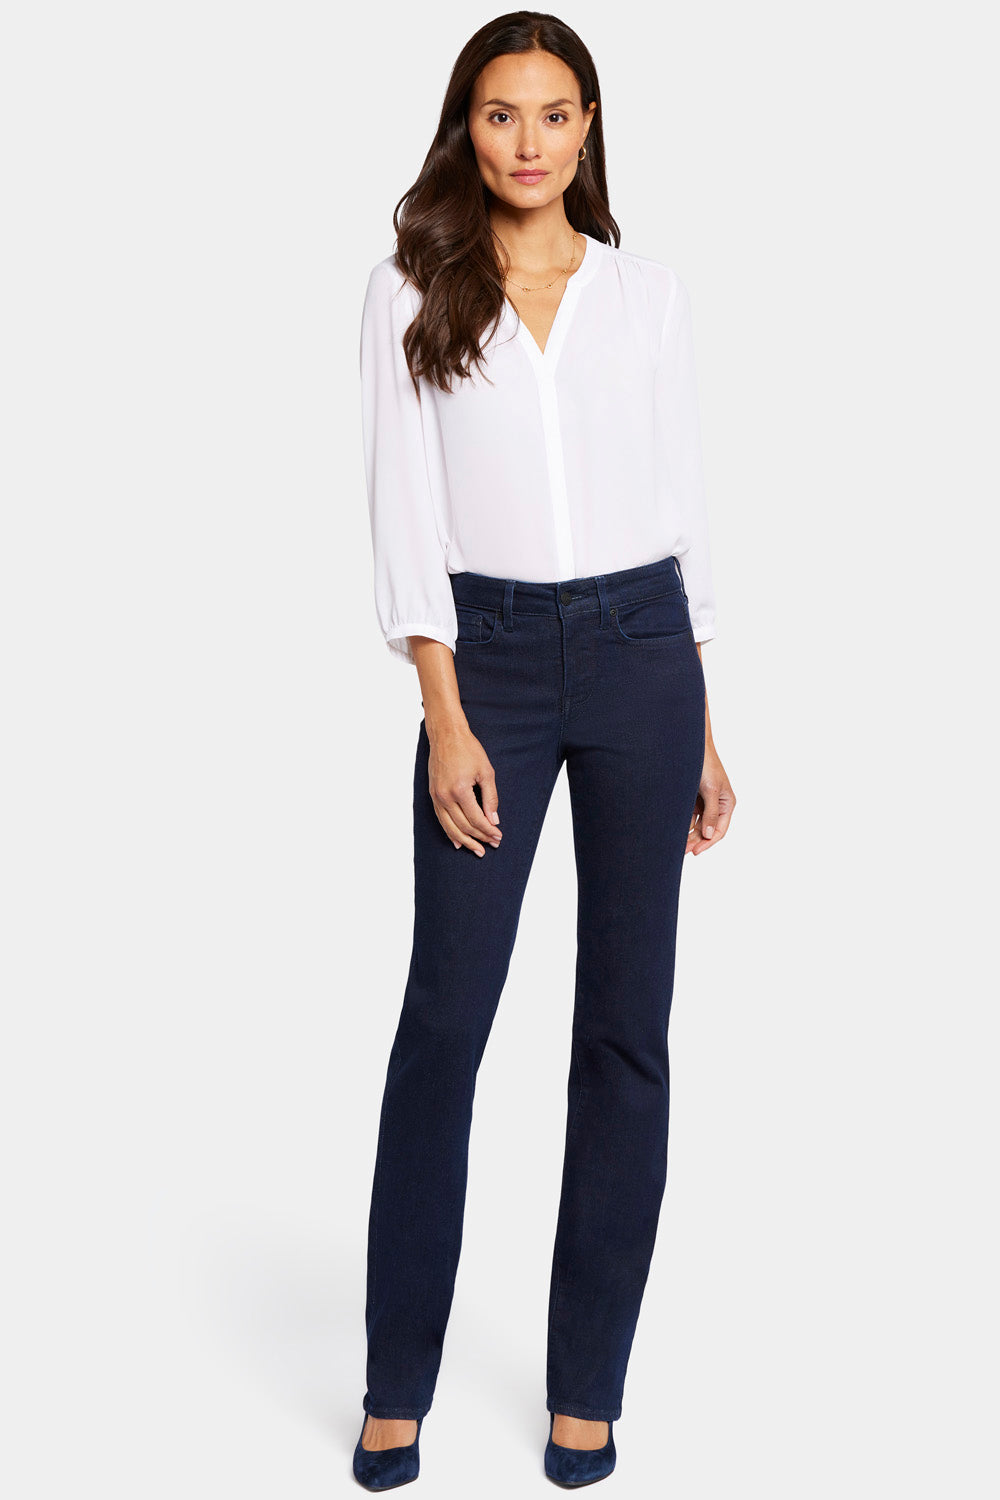 Marilyn Straight Jeans In Petite With Short 28 Inseam - Rinse Blue